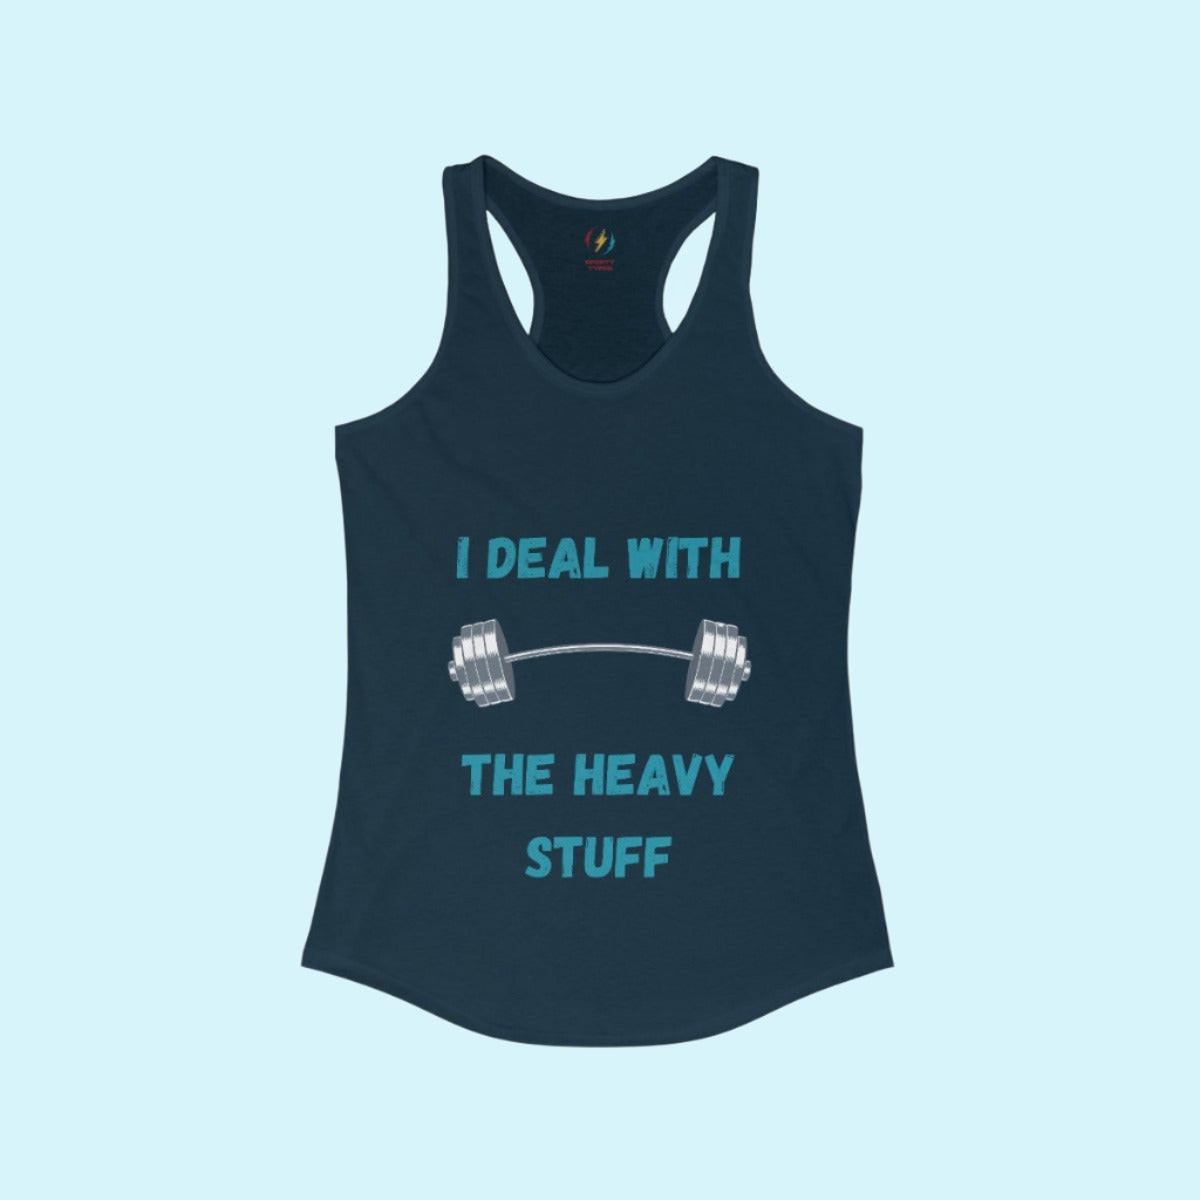 Midnight Navy Women's I Deal With The Heavy Stuff Performance Racerback Tank Top